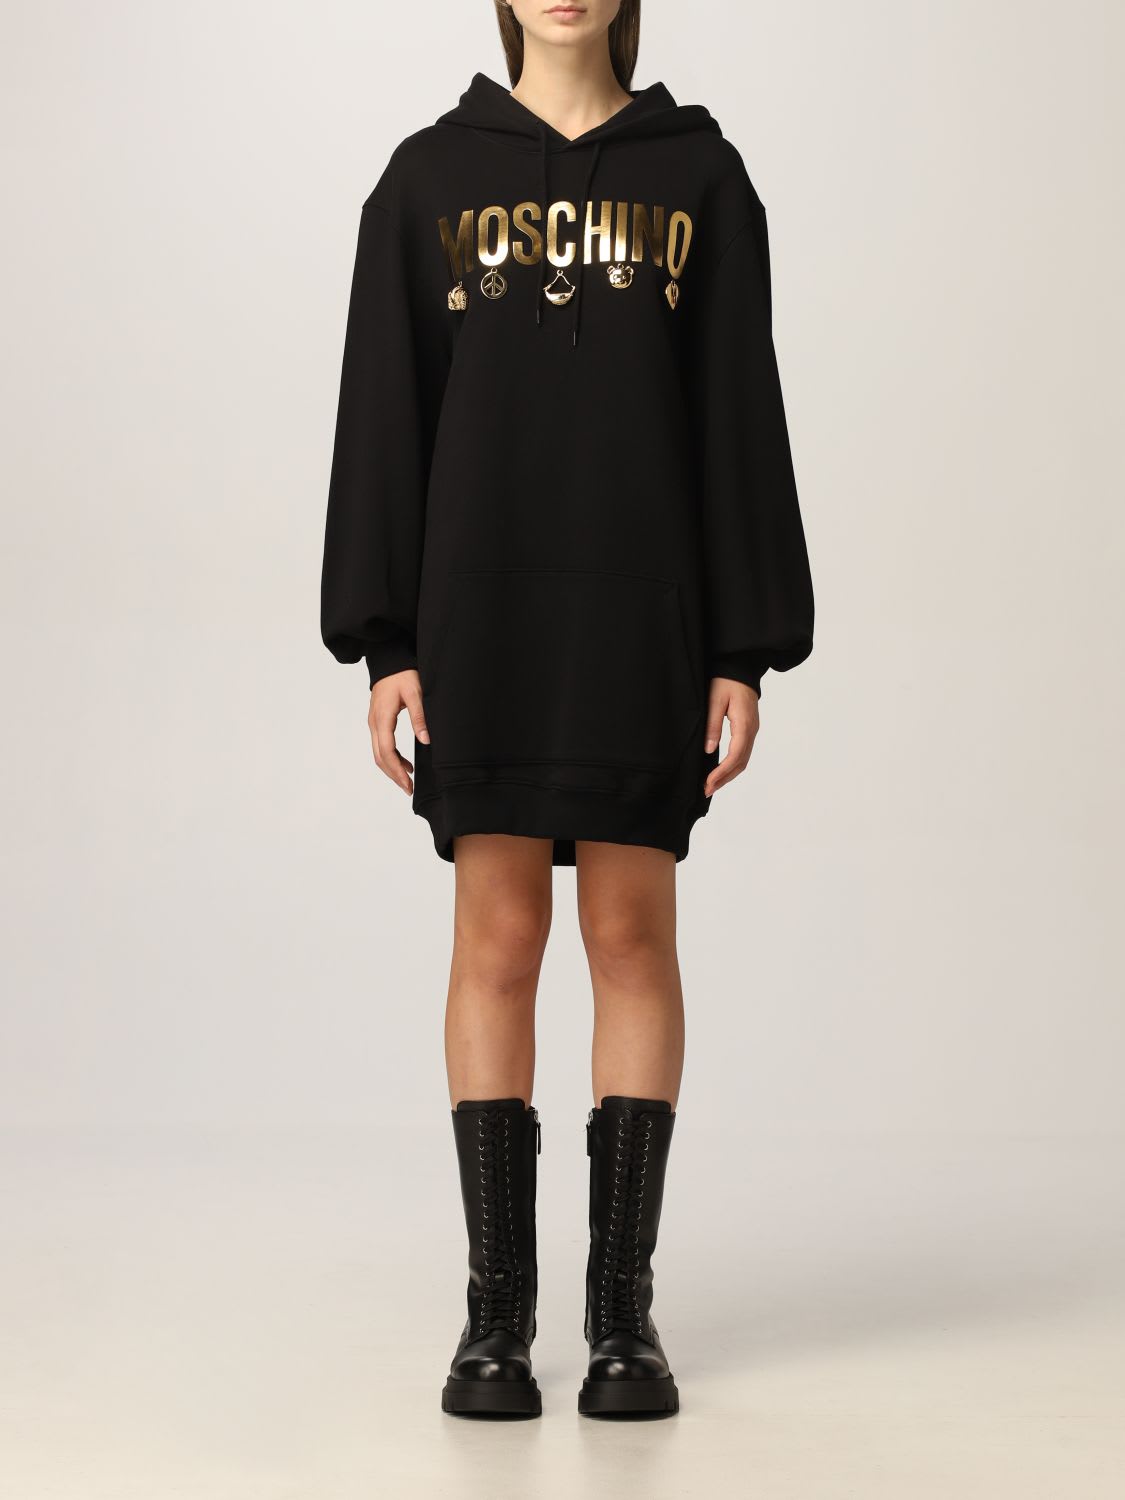 Moschino Couture Dress Moschino Couture Cotton Sweatshirt Dress With Charmes